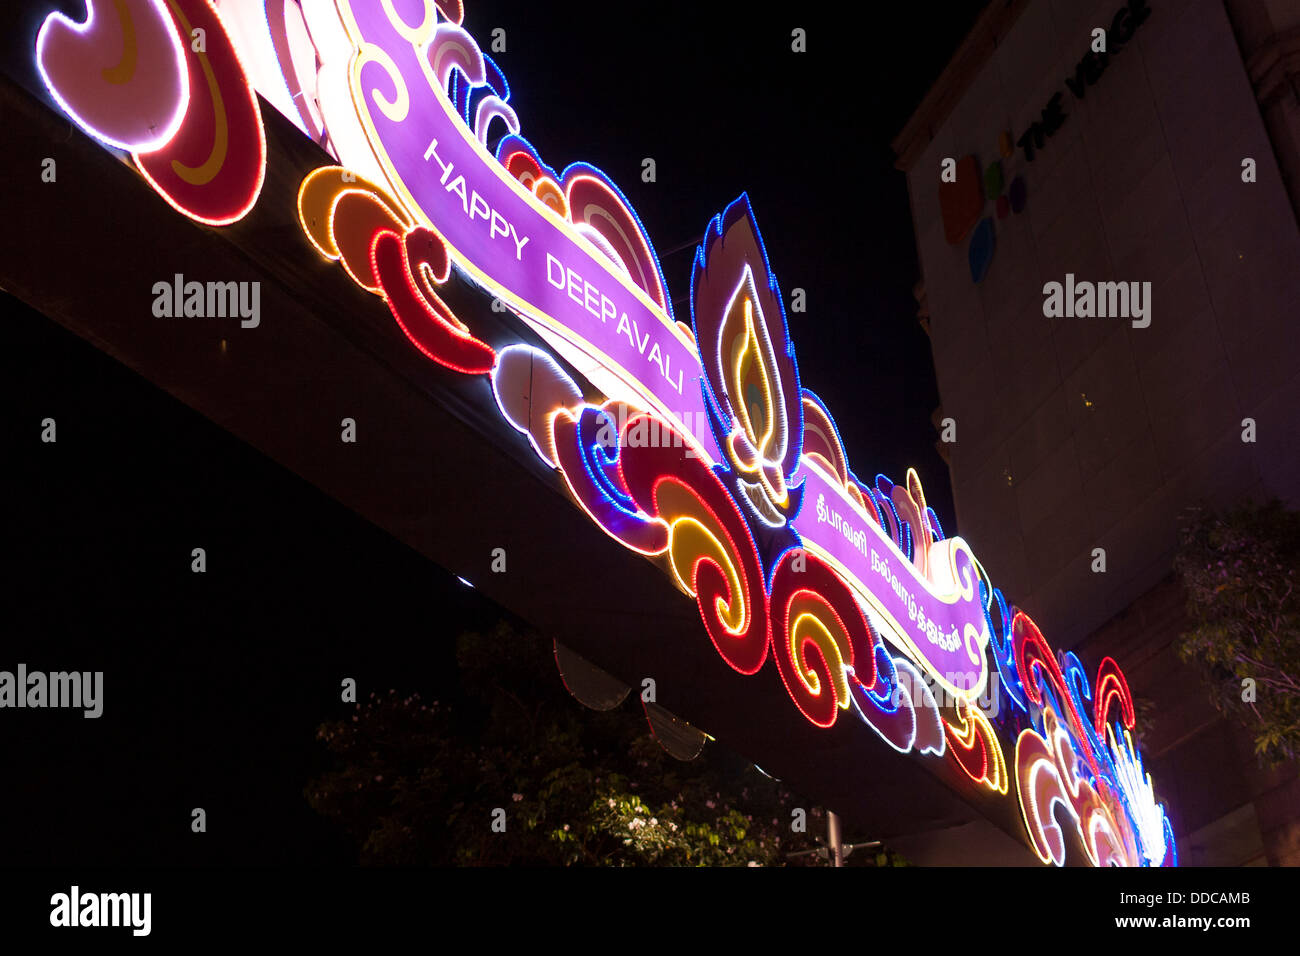 Decorations illuminated across the streets celebrate the Hindi festival of Diwali or Deepavali the Asian city state of Singapore Stock Photo